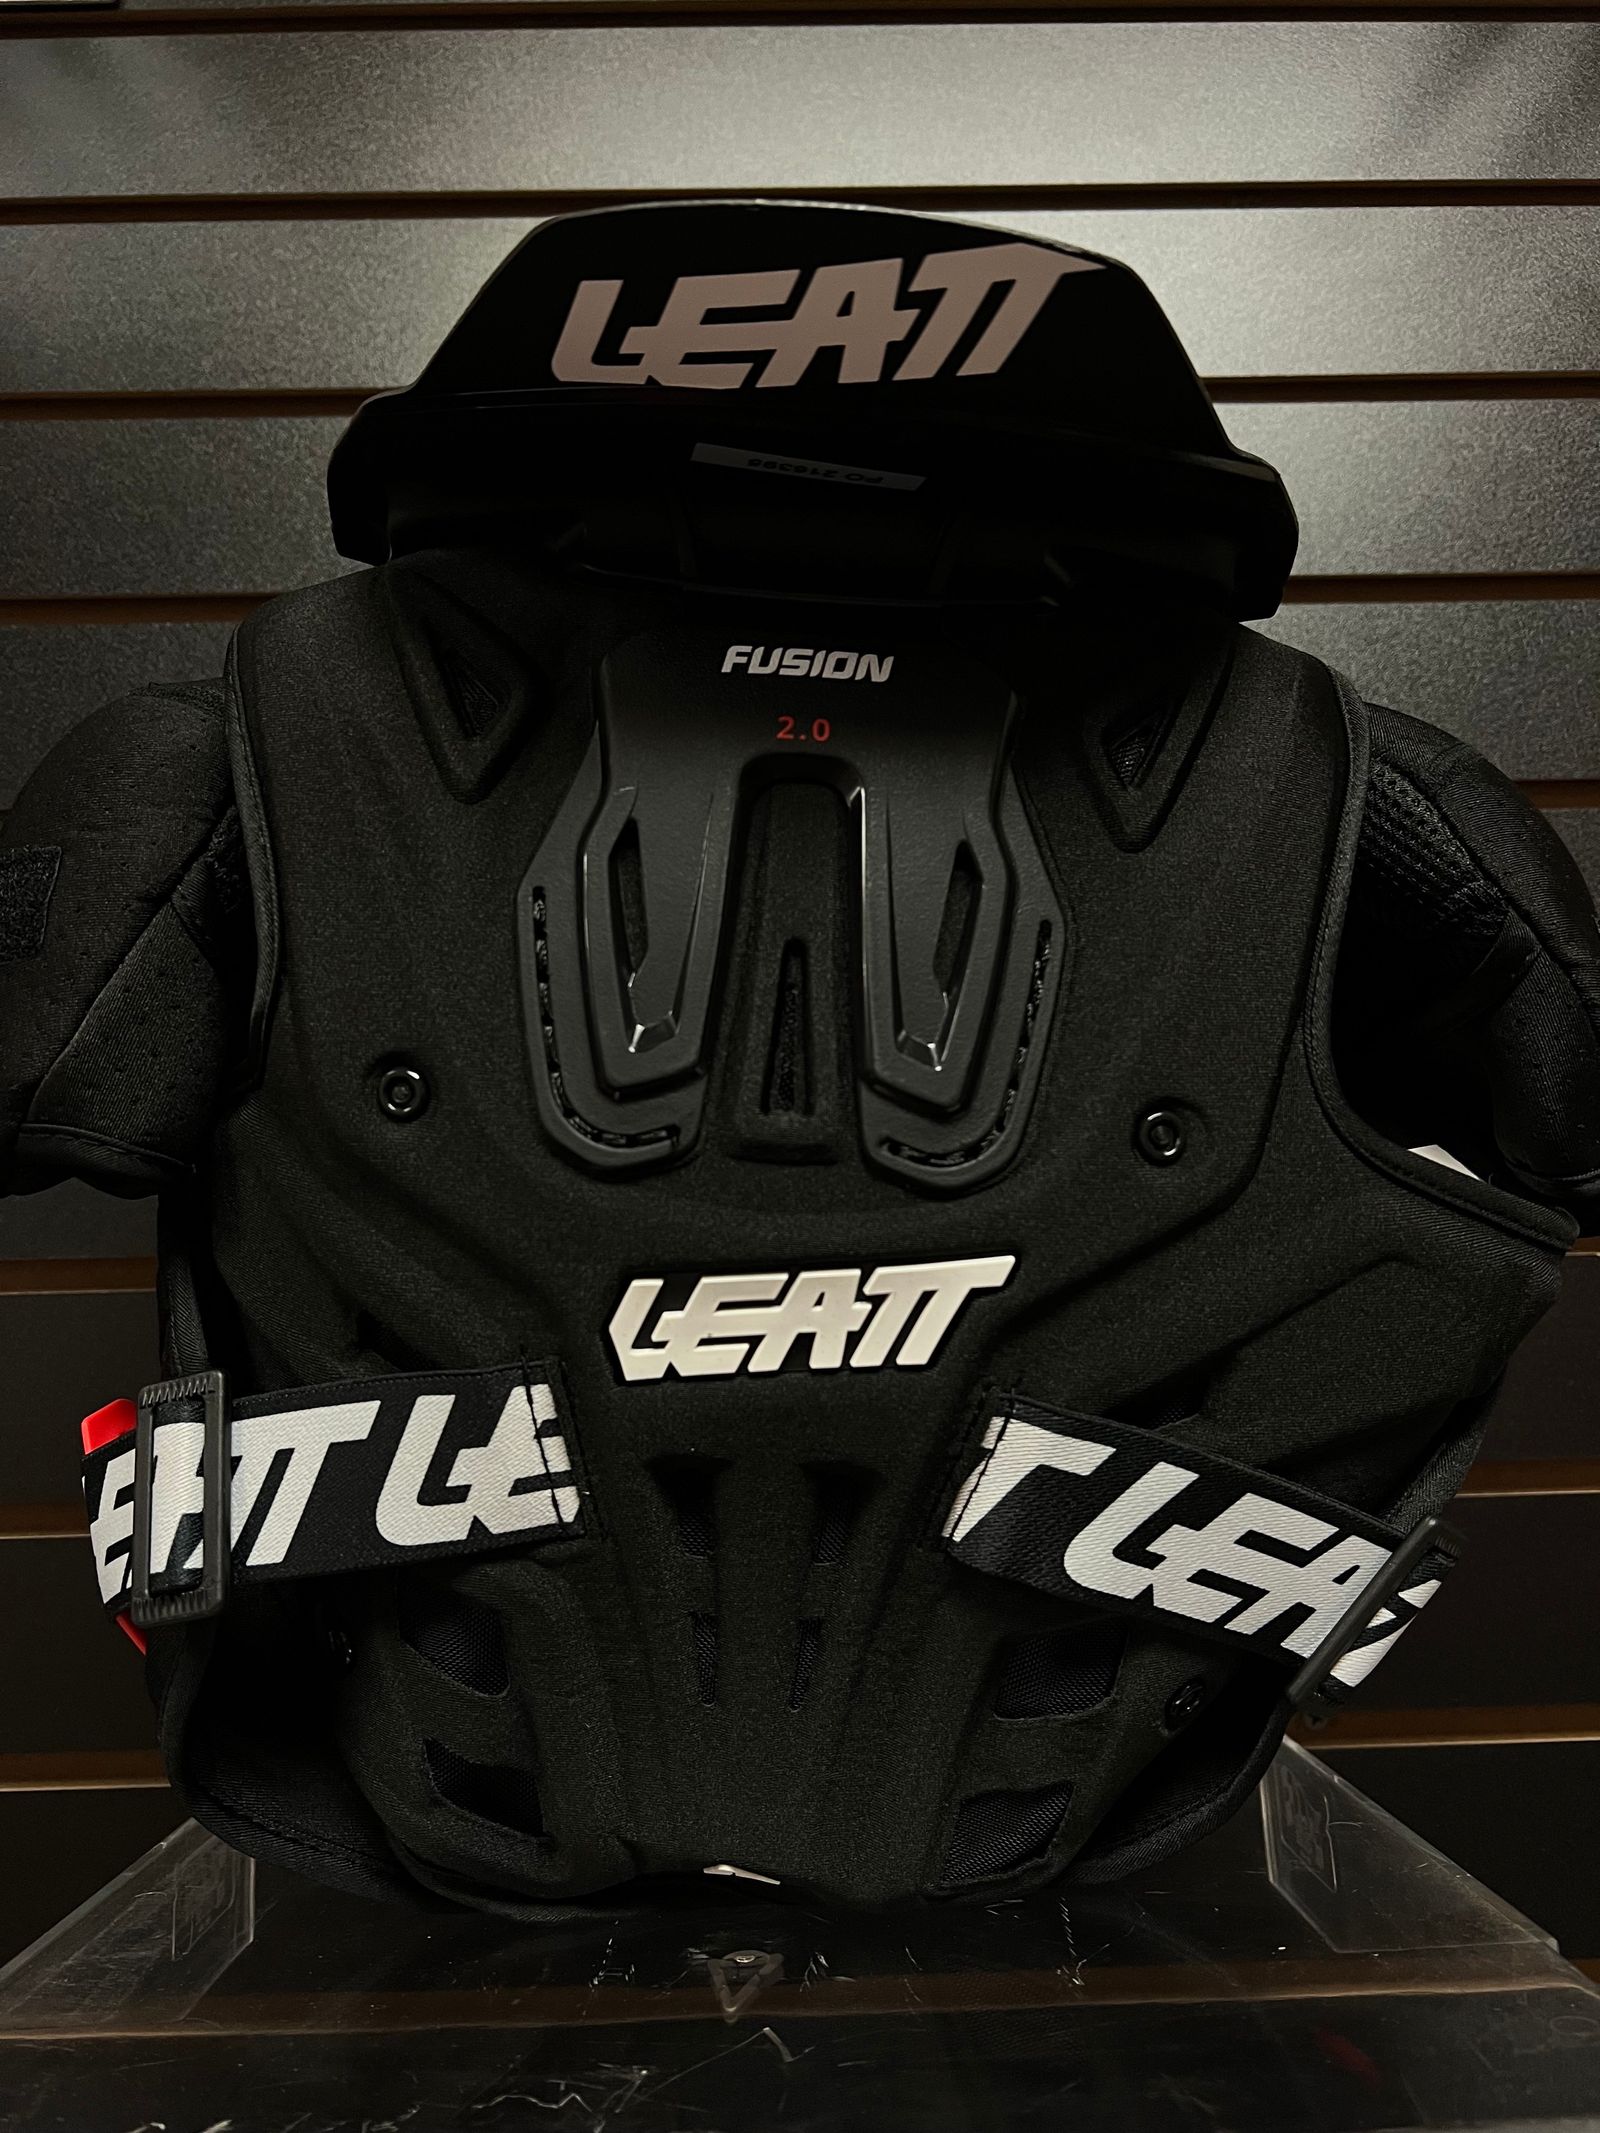 Youth Leatt Protective - Size L/XL